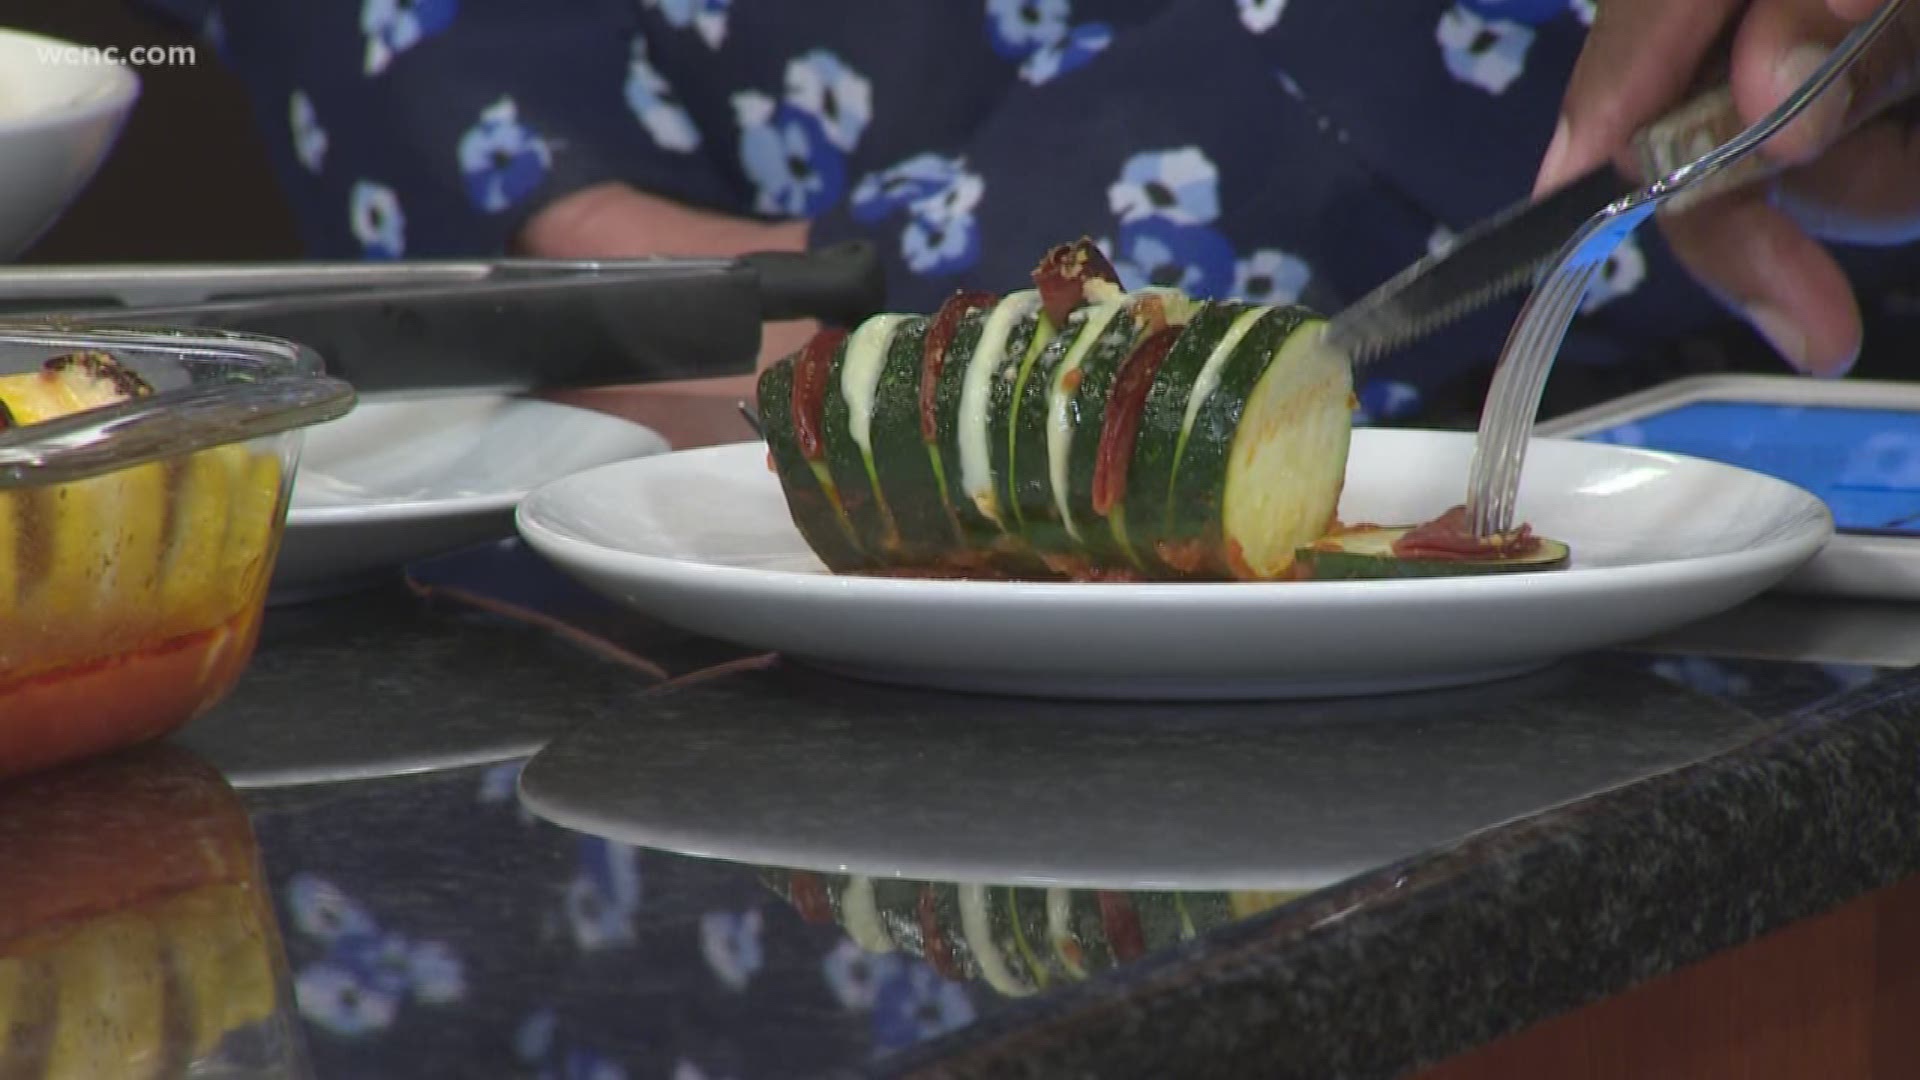 Andy and Melanie Tritten show us a creative way to cook zucchini so we can enjoy pizza without the carbs.